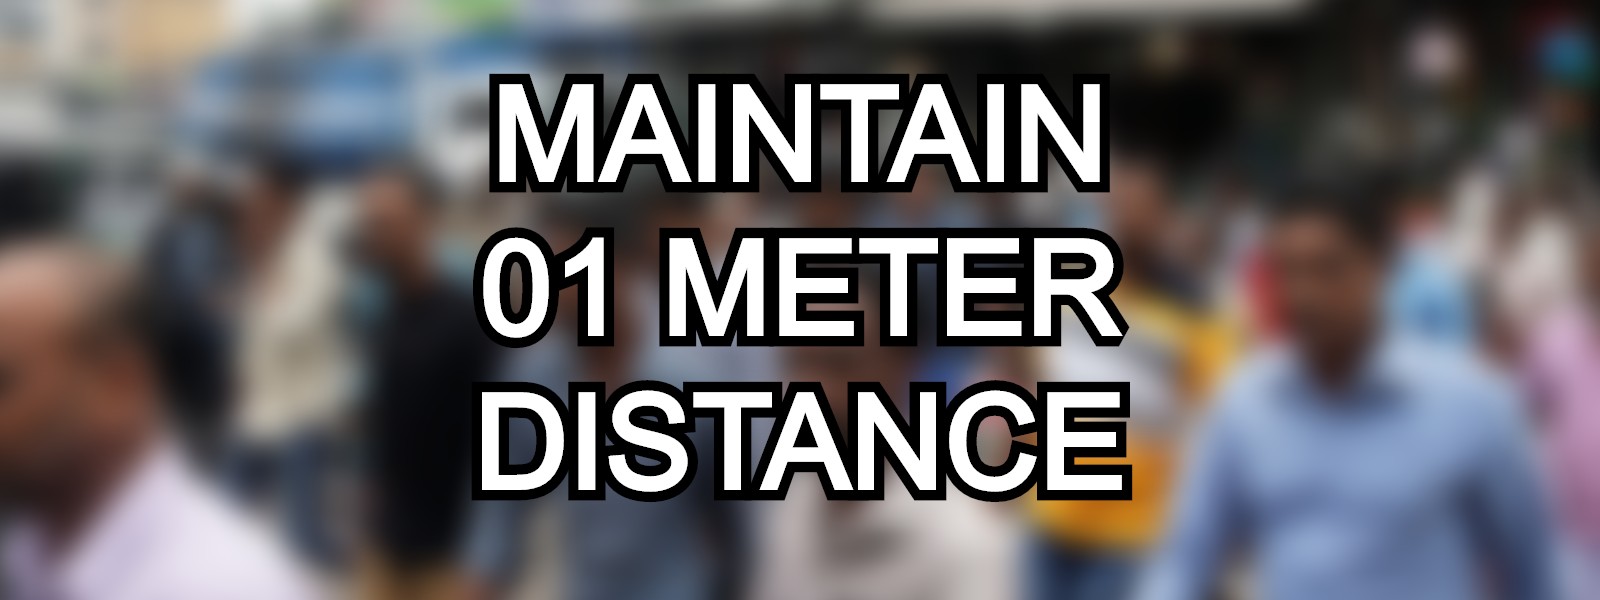 01 METER DISTANCE TO BE MAINTAINED IN PUBLIC